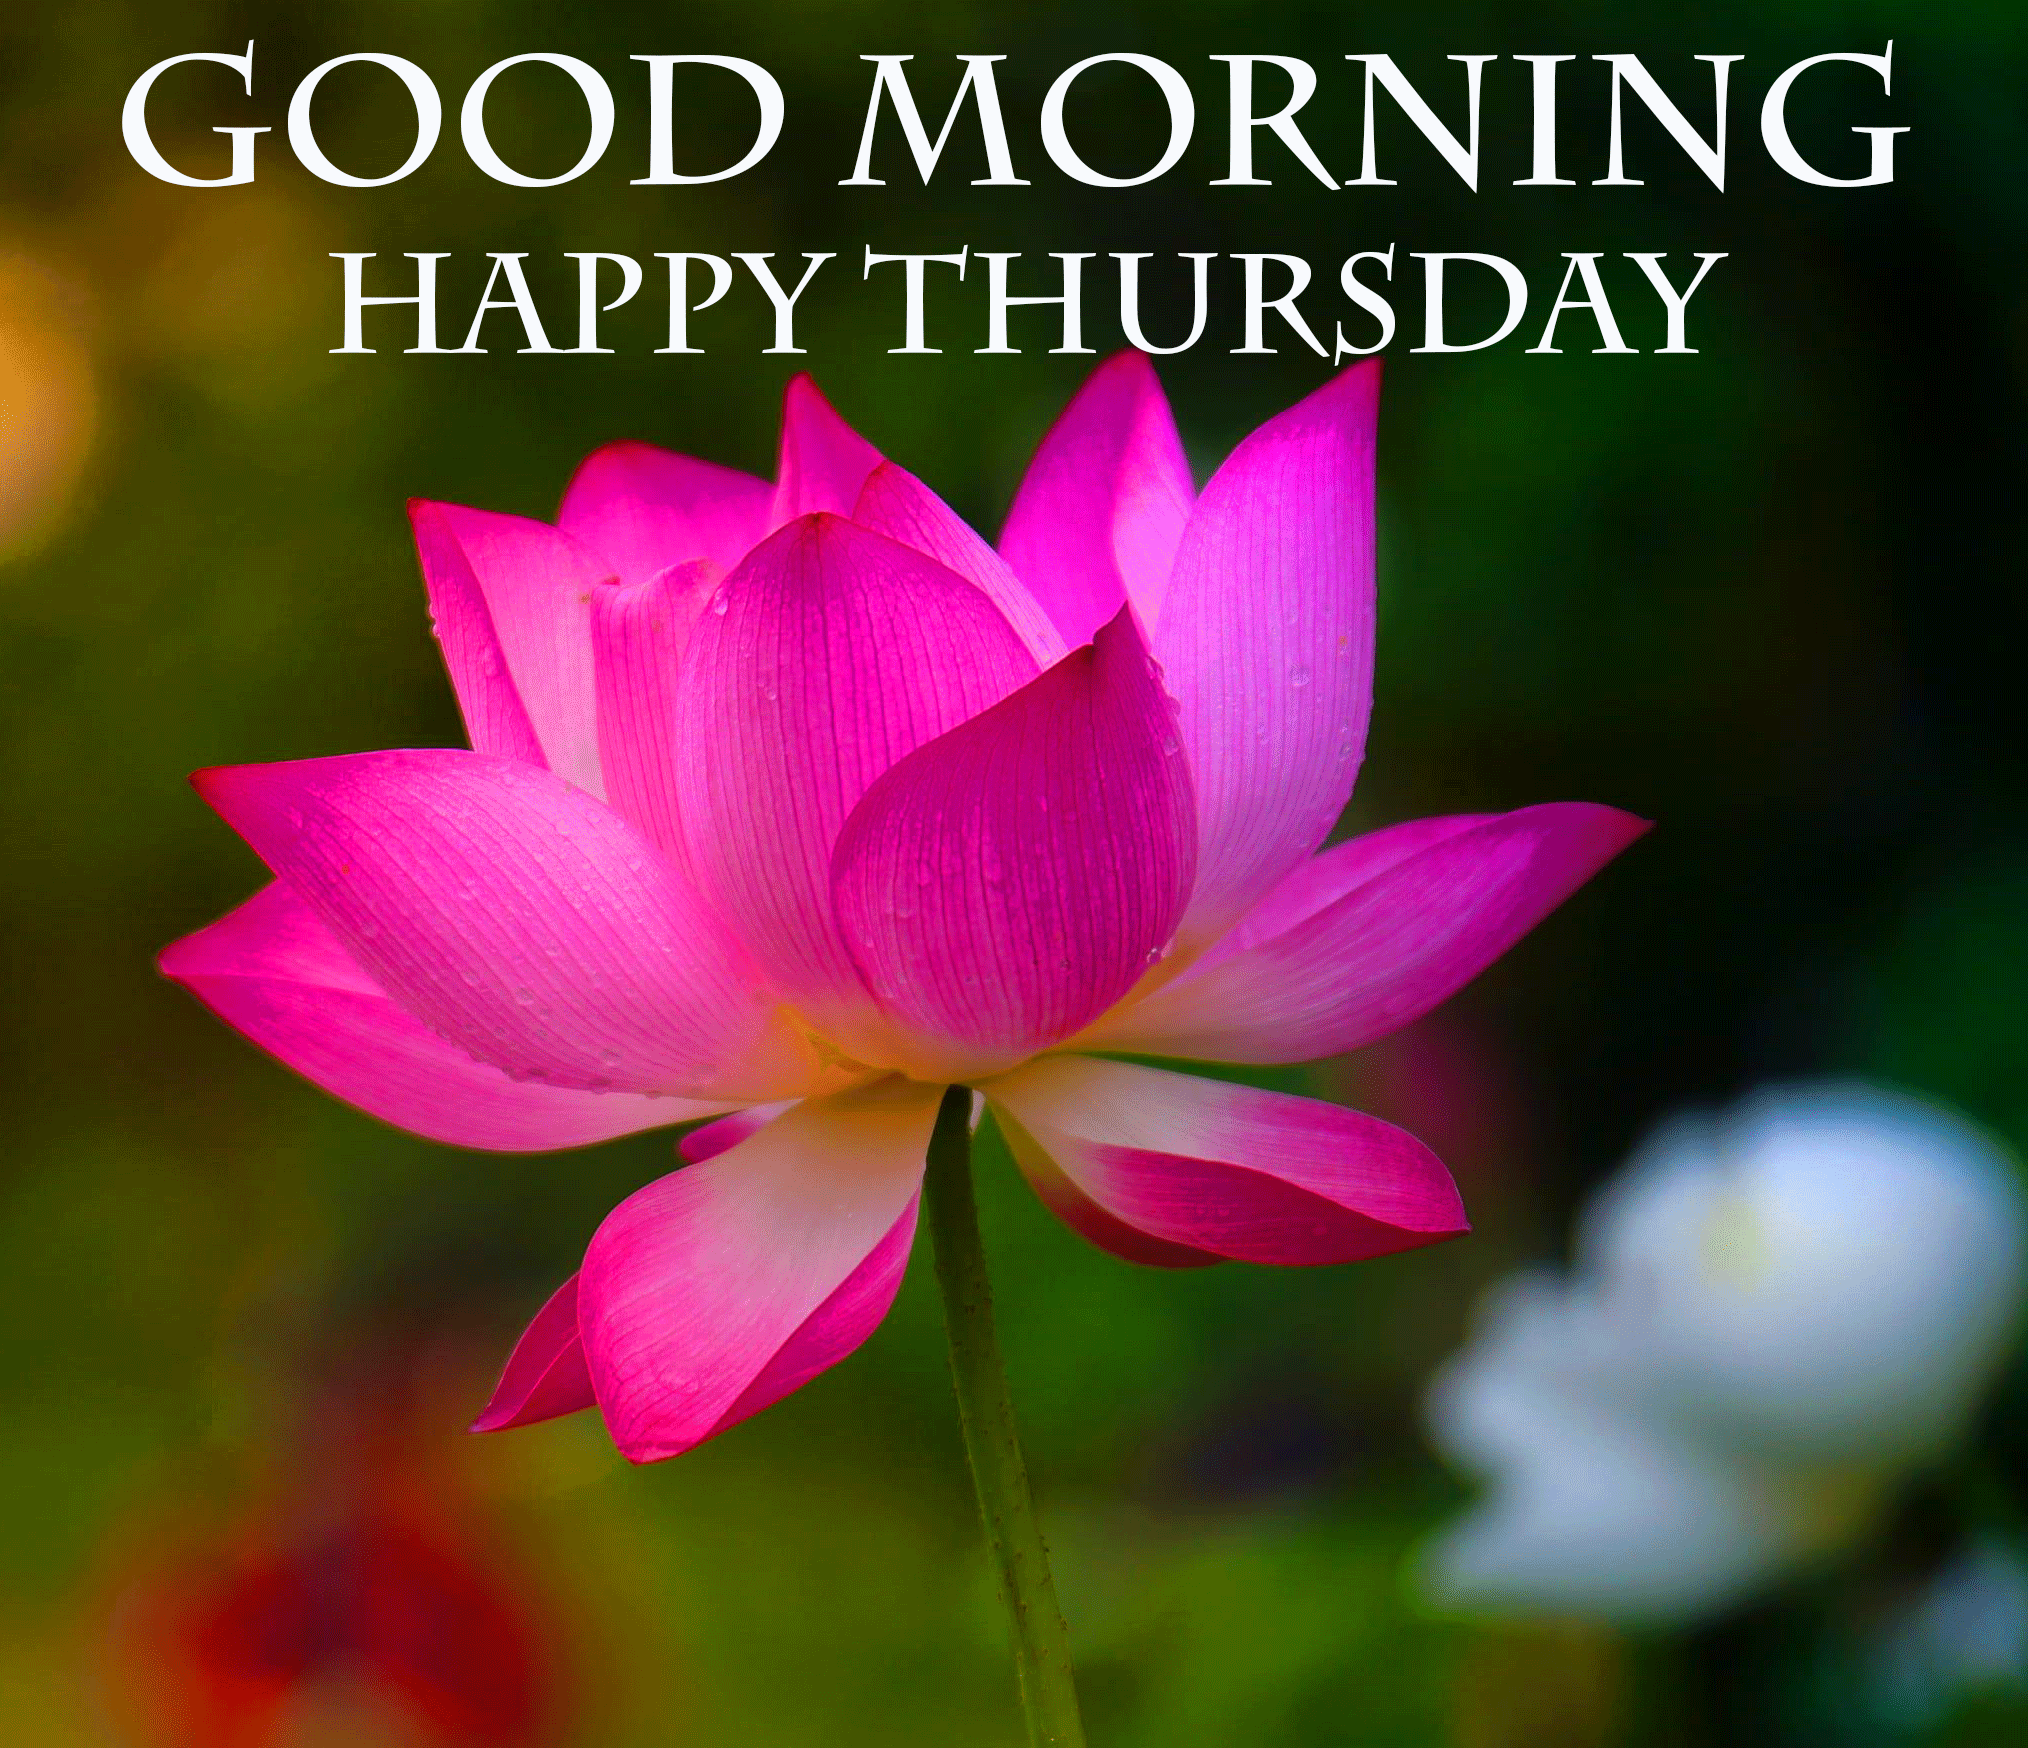 Good Morning Happy Thursday Images, Memes, Quotes, Blessings